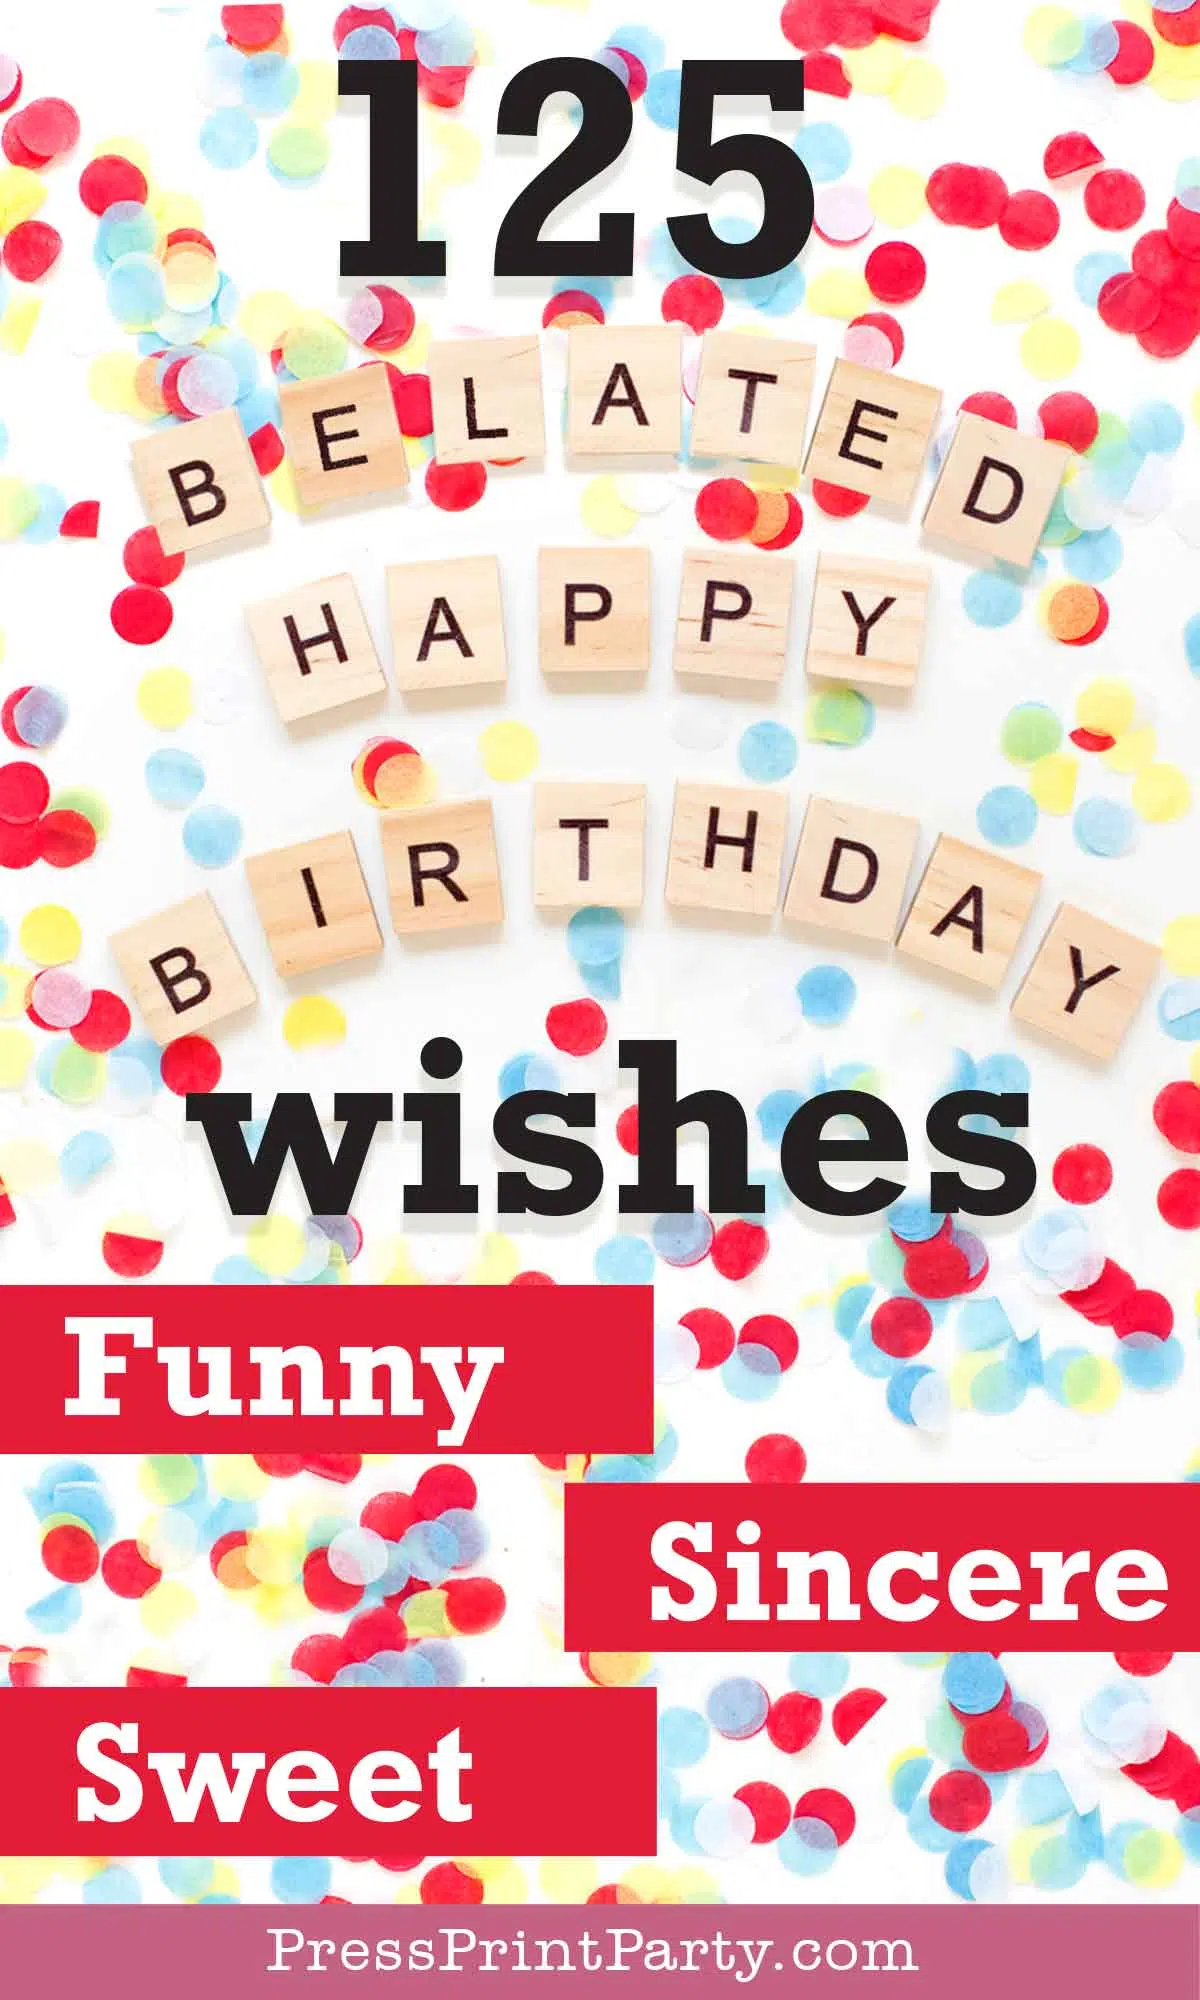 belated birthday wishes quotes for friends